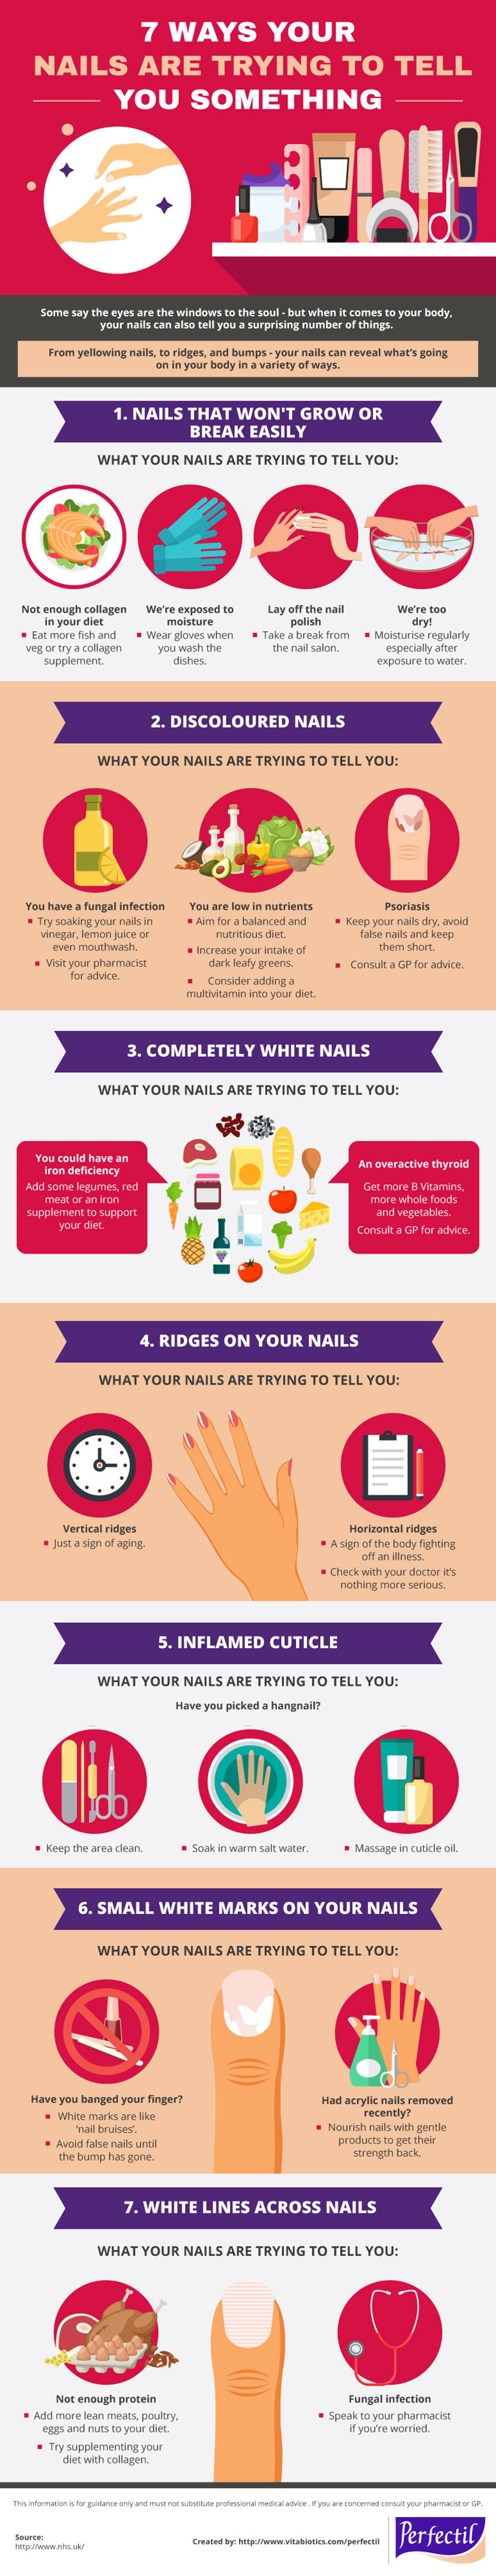 7 Common Nail Problems and Solutions Infographic